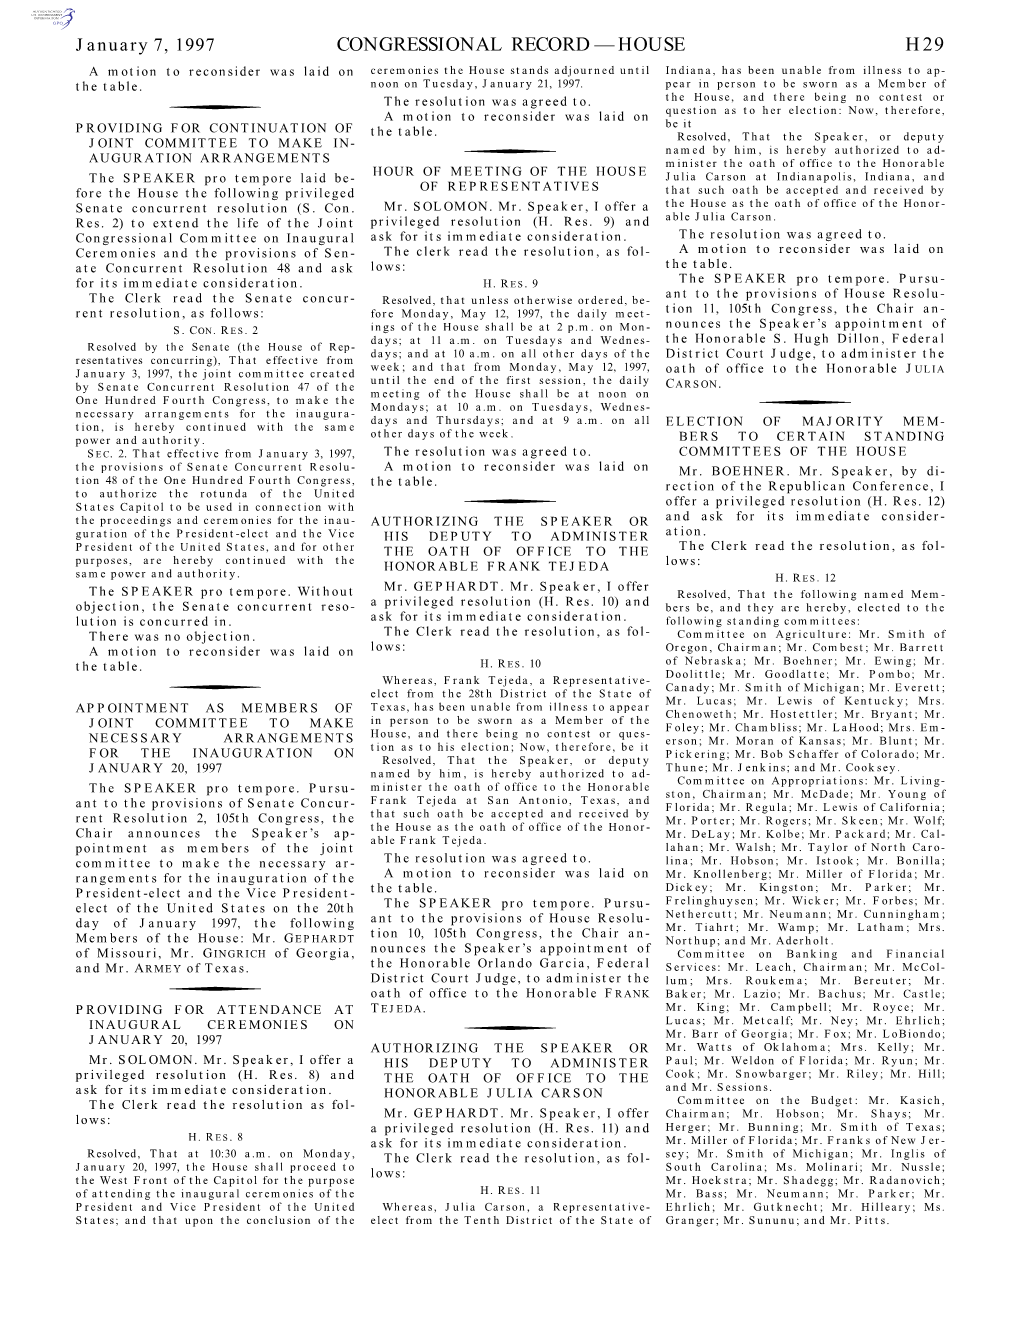 Congressional Record—House